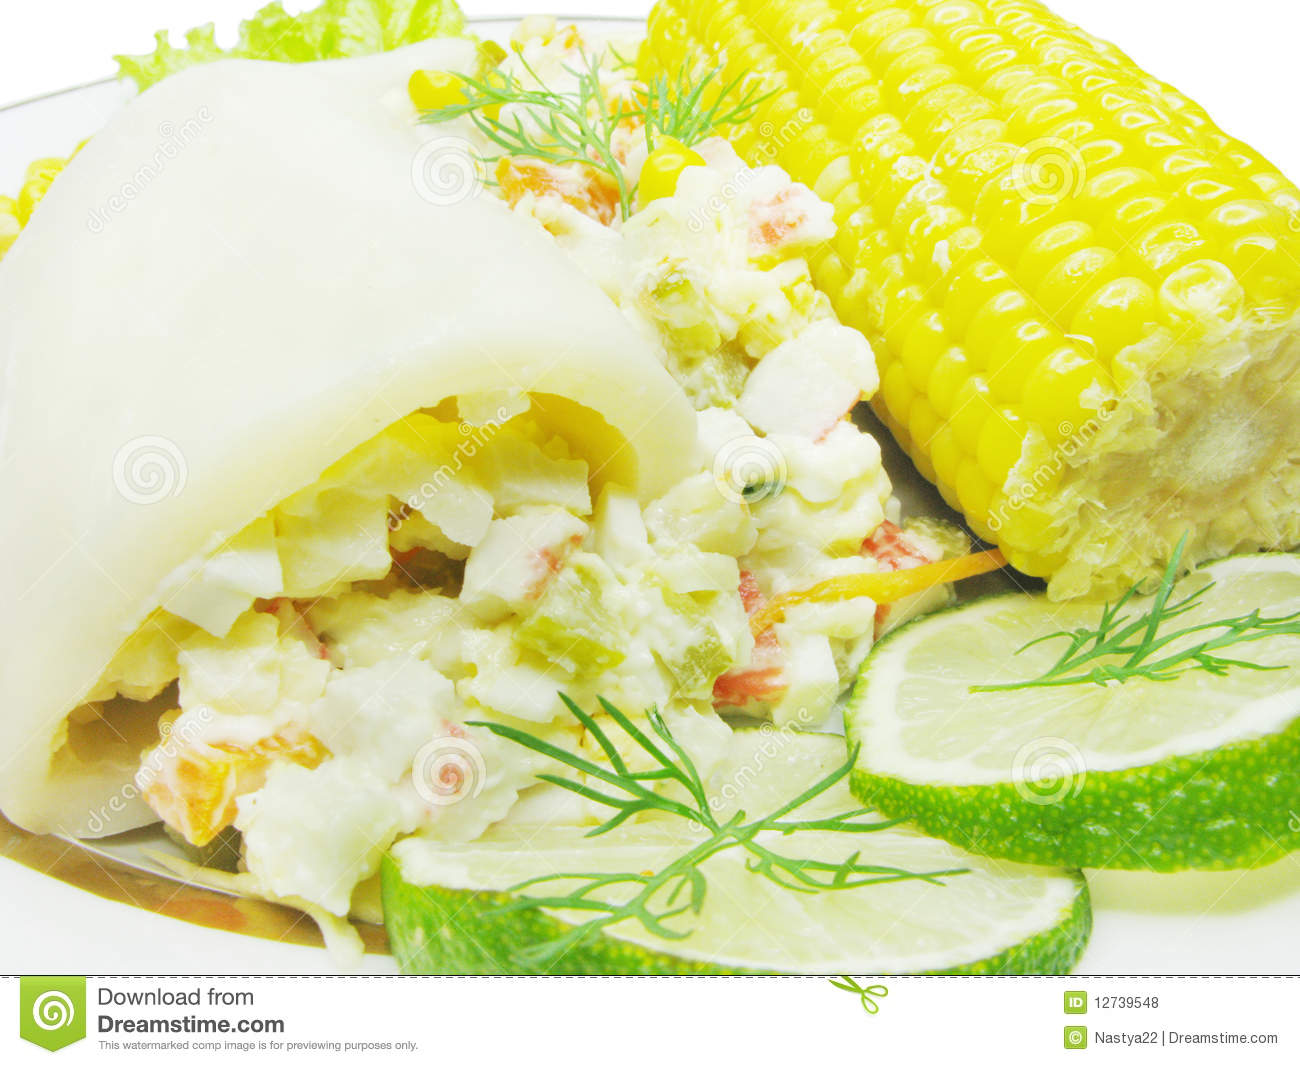 Squid Meal With Corn Royalty Free Stock Photos   Image  12739548